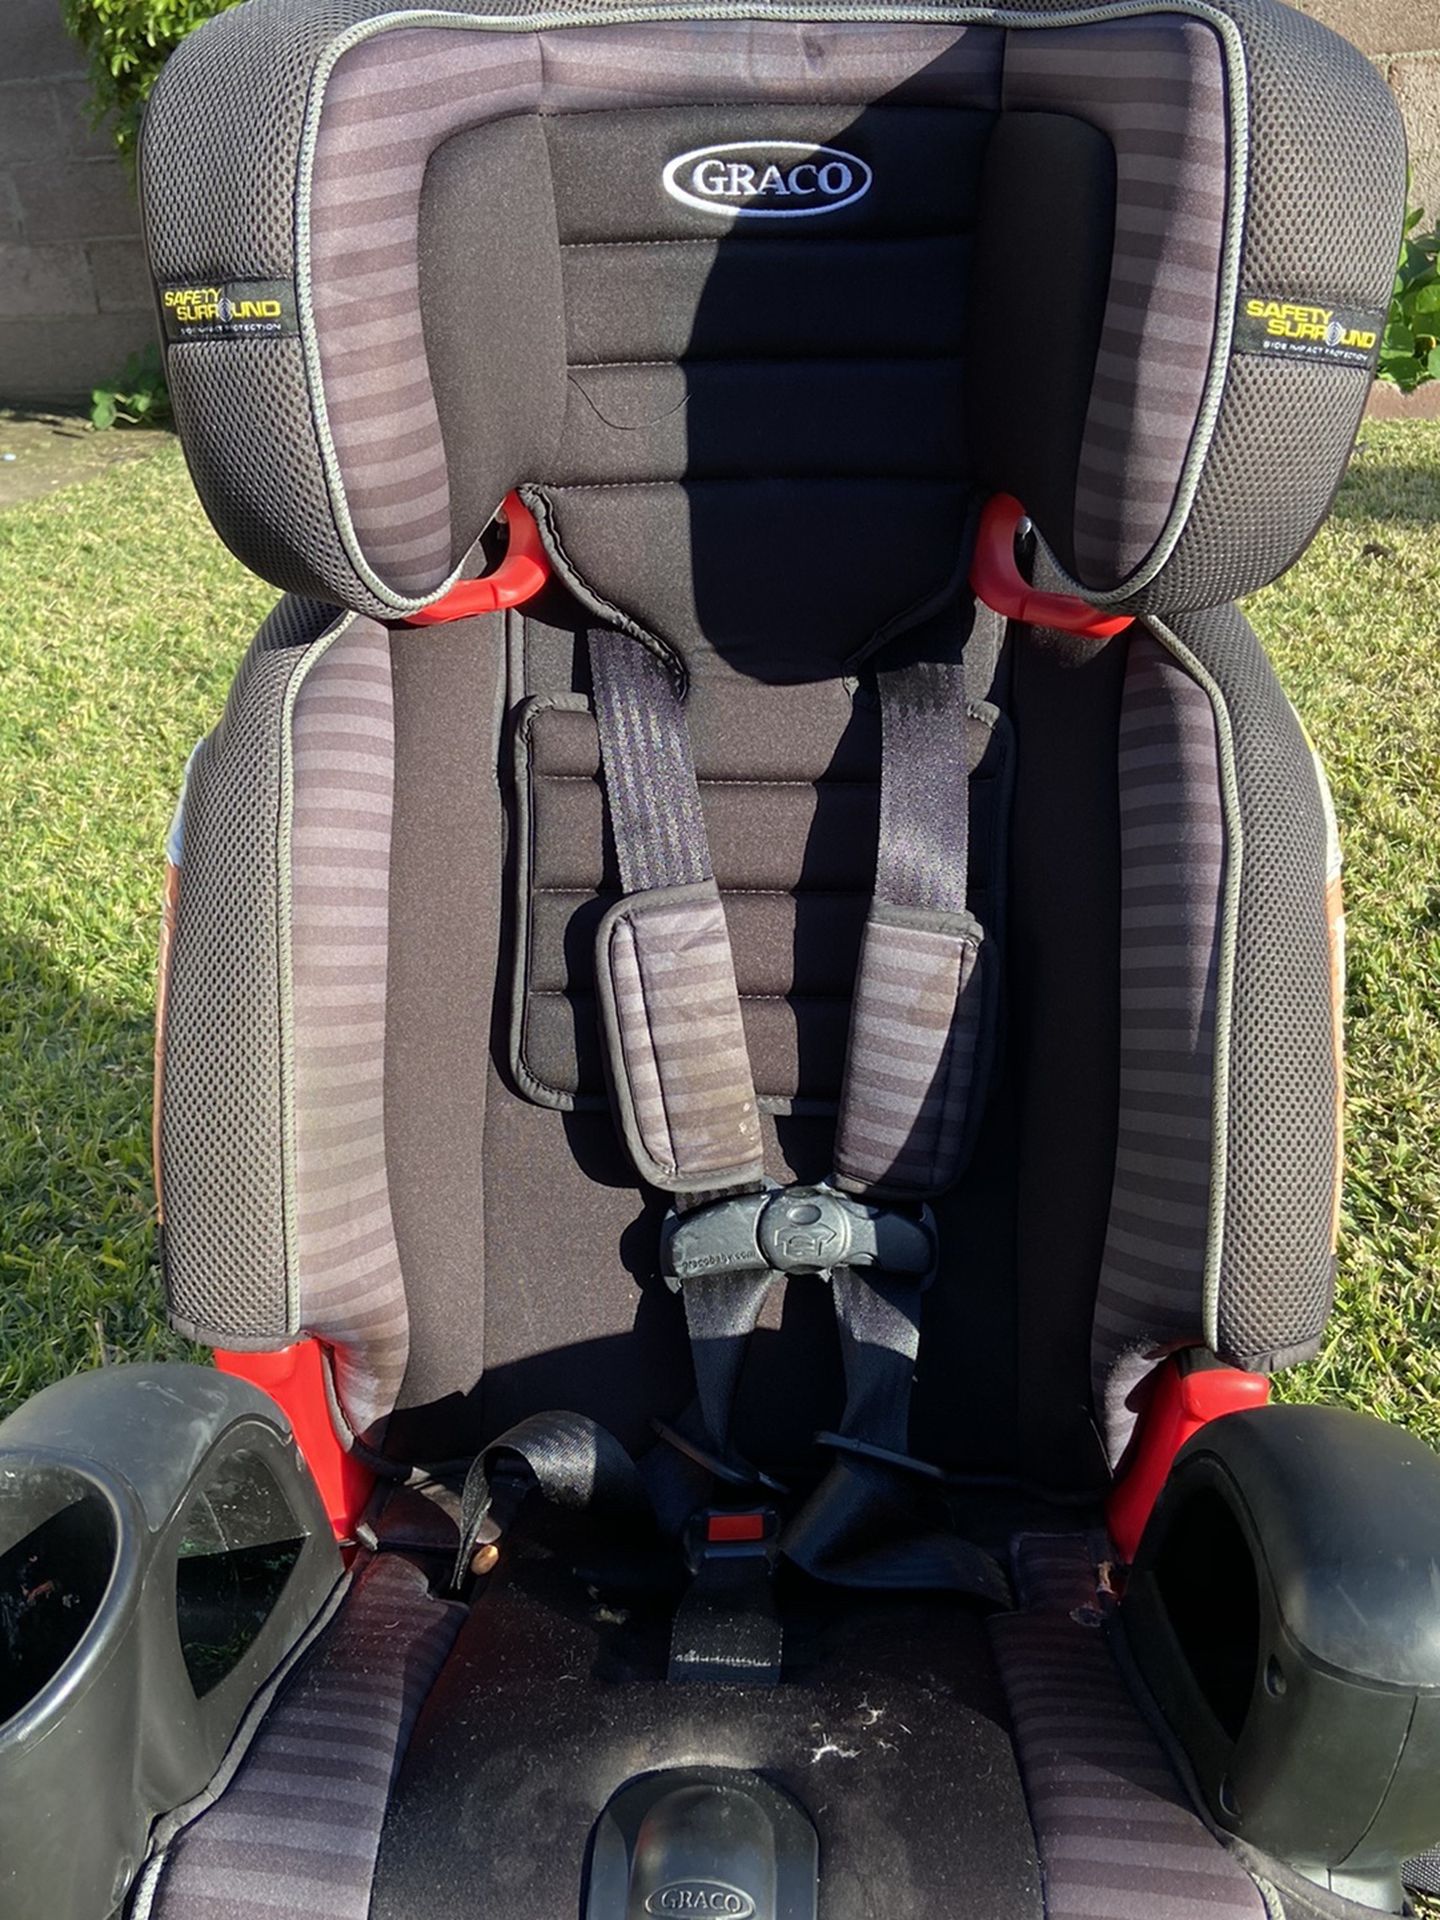 Graco Car Seat/Booster